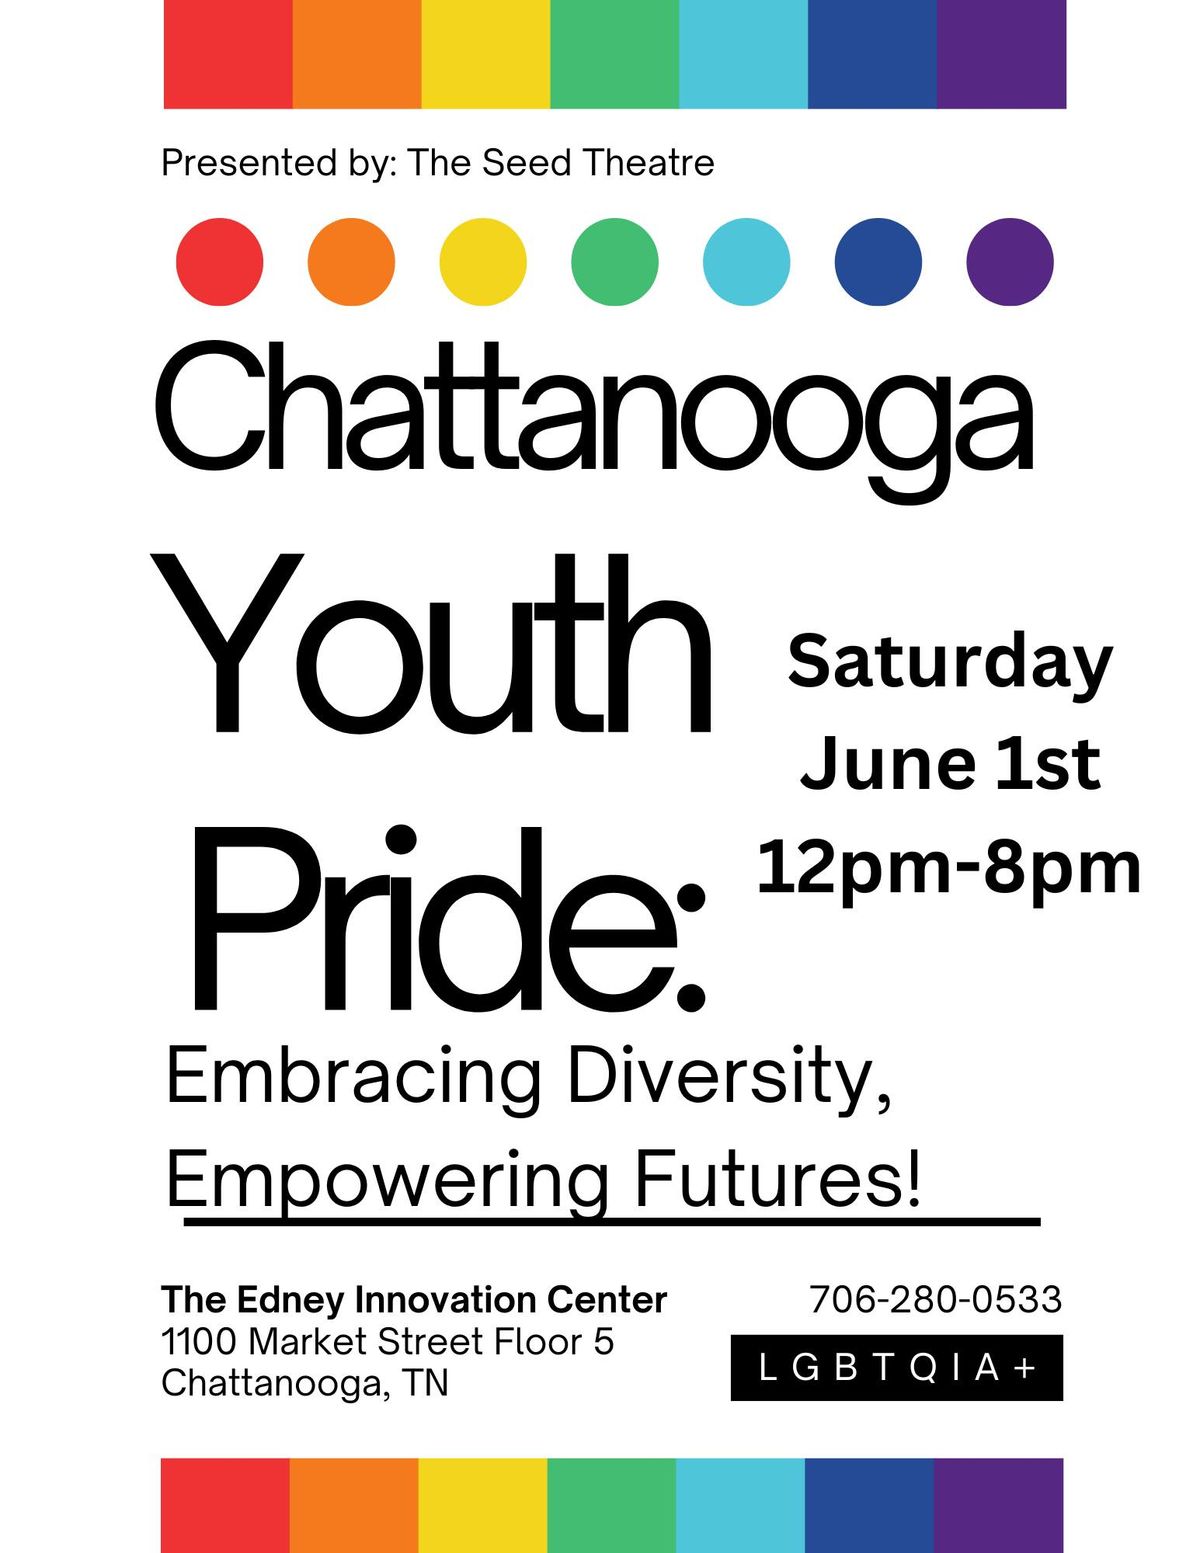 Chattanooga Youth Pride